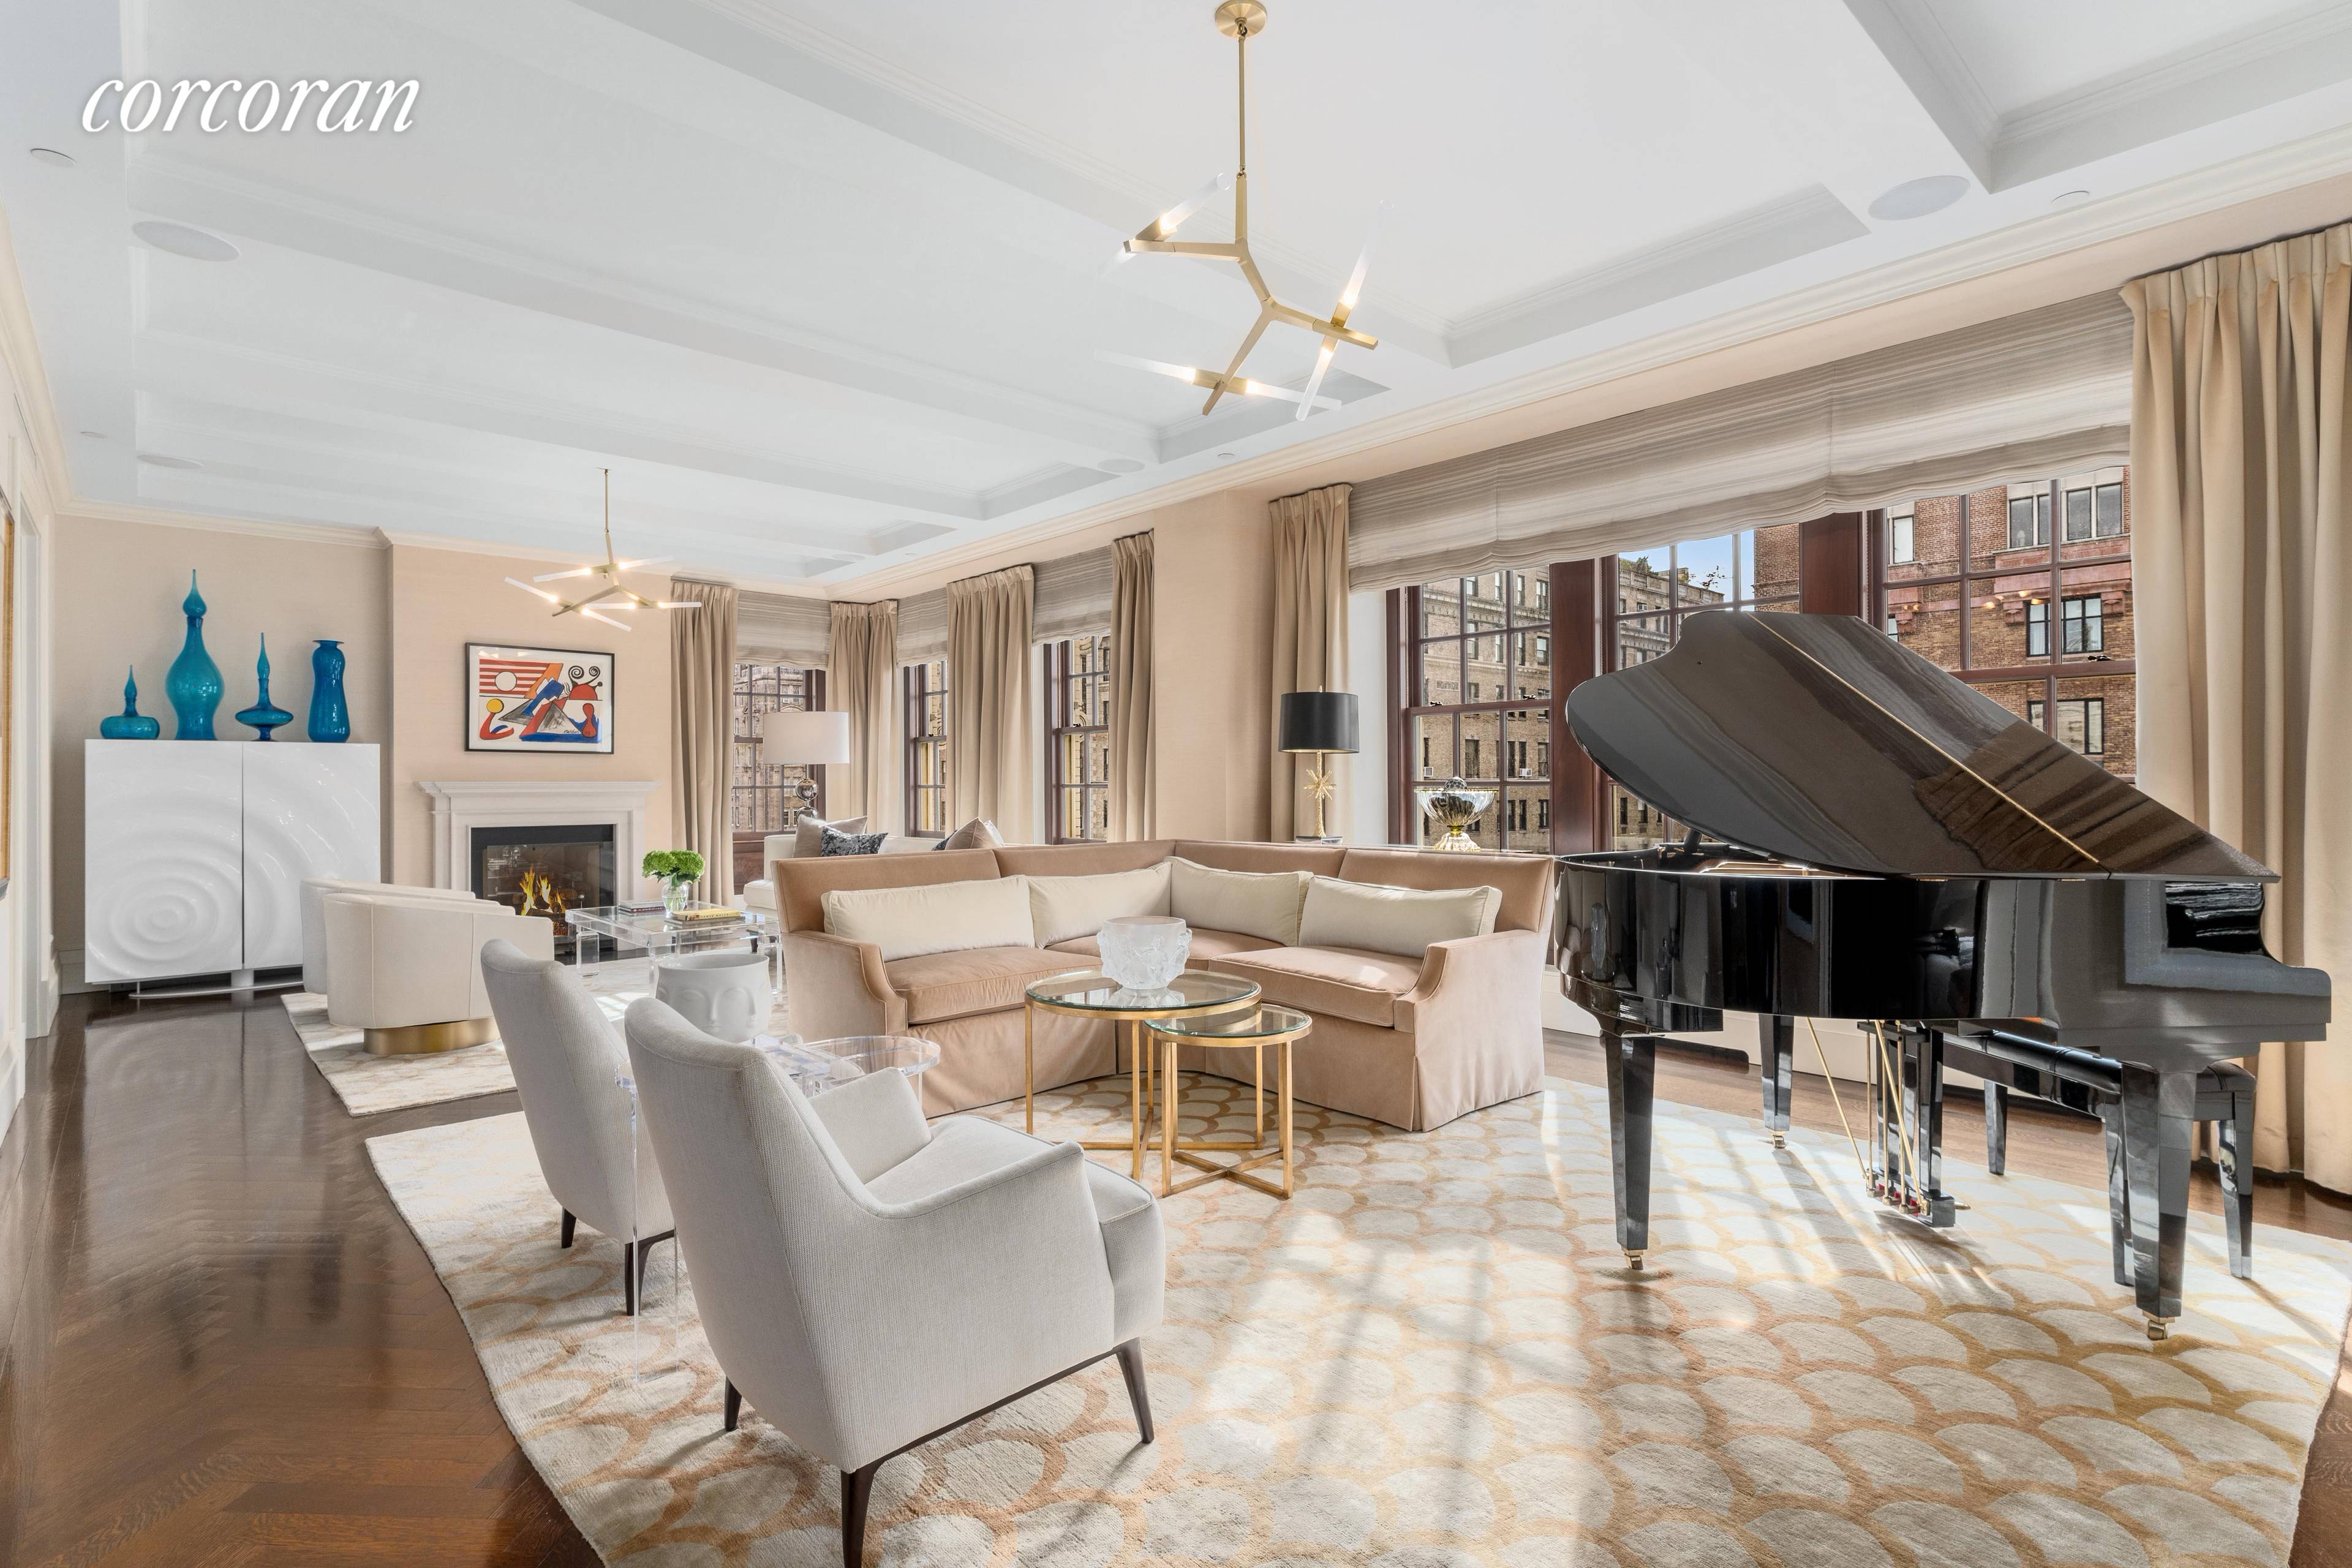 Rarely available and situated on one of the prettiest blocks of Park Avenue, this exquisite full floor luxury pre war condominium, must be seen to be believed.